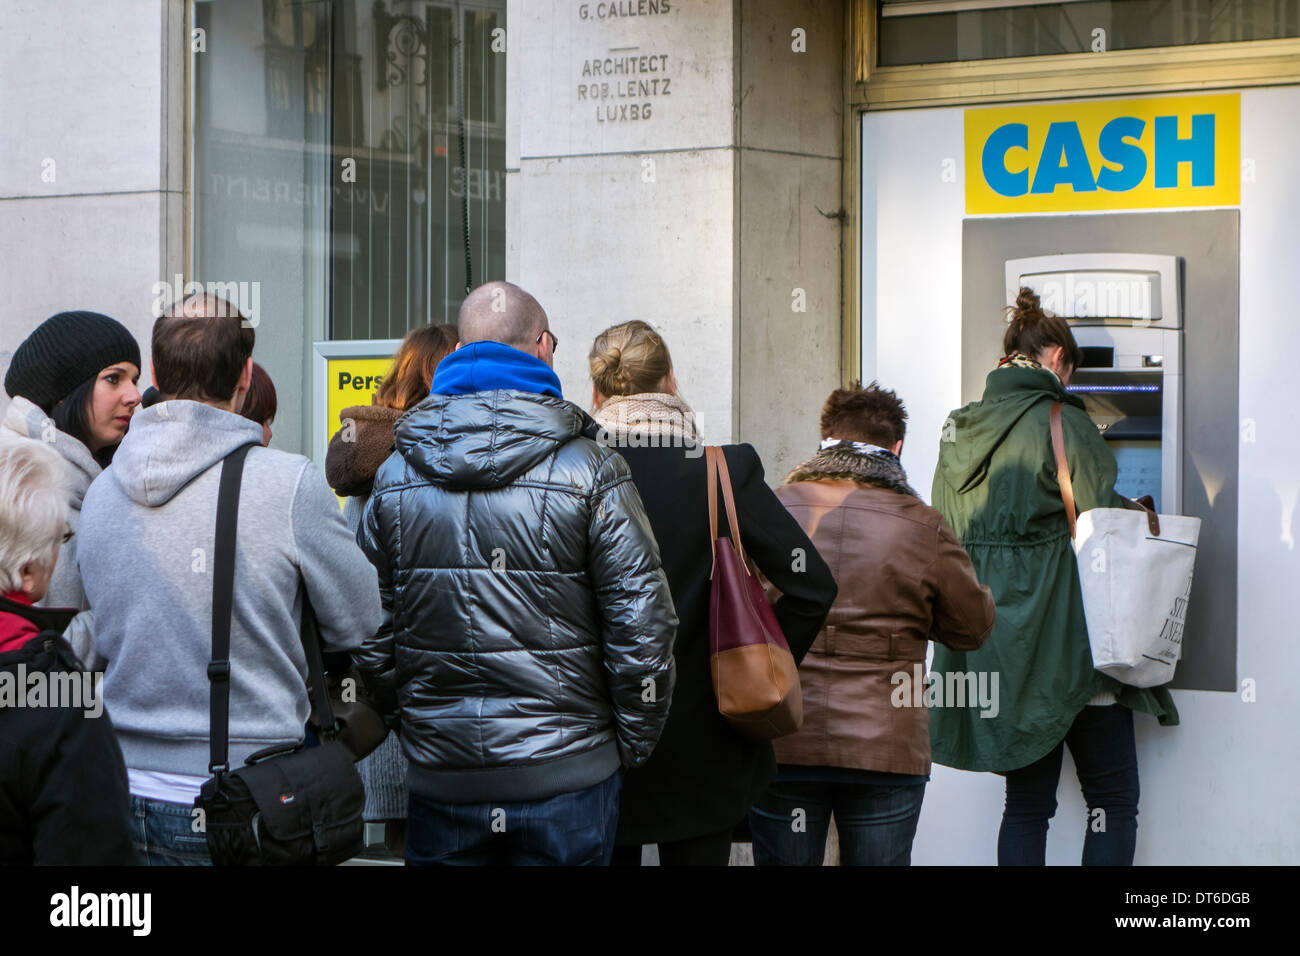 Shoppers waiting in queue to collect money from ATM cash dispenser of bank in shopping street in winter Stock Photo